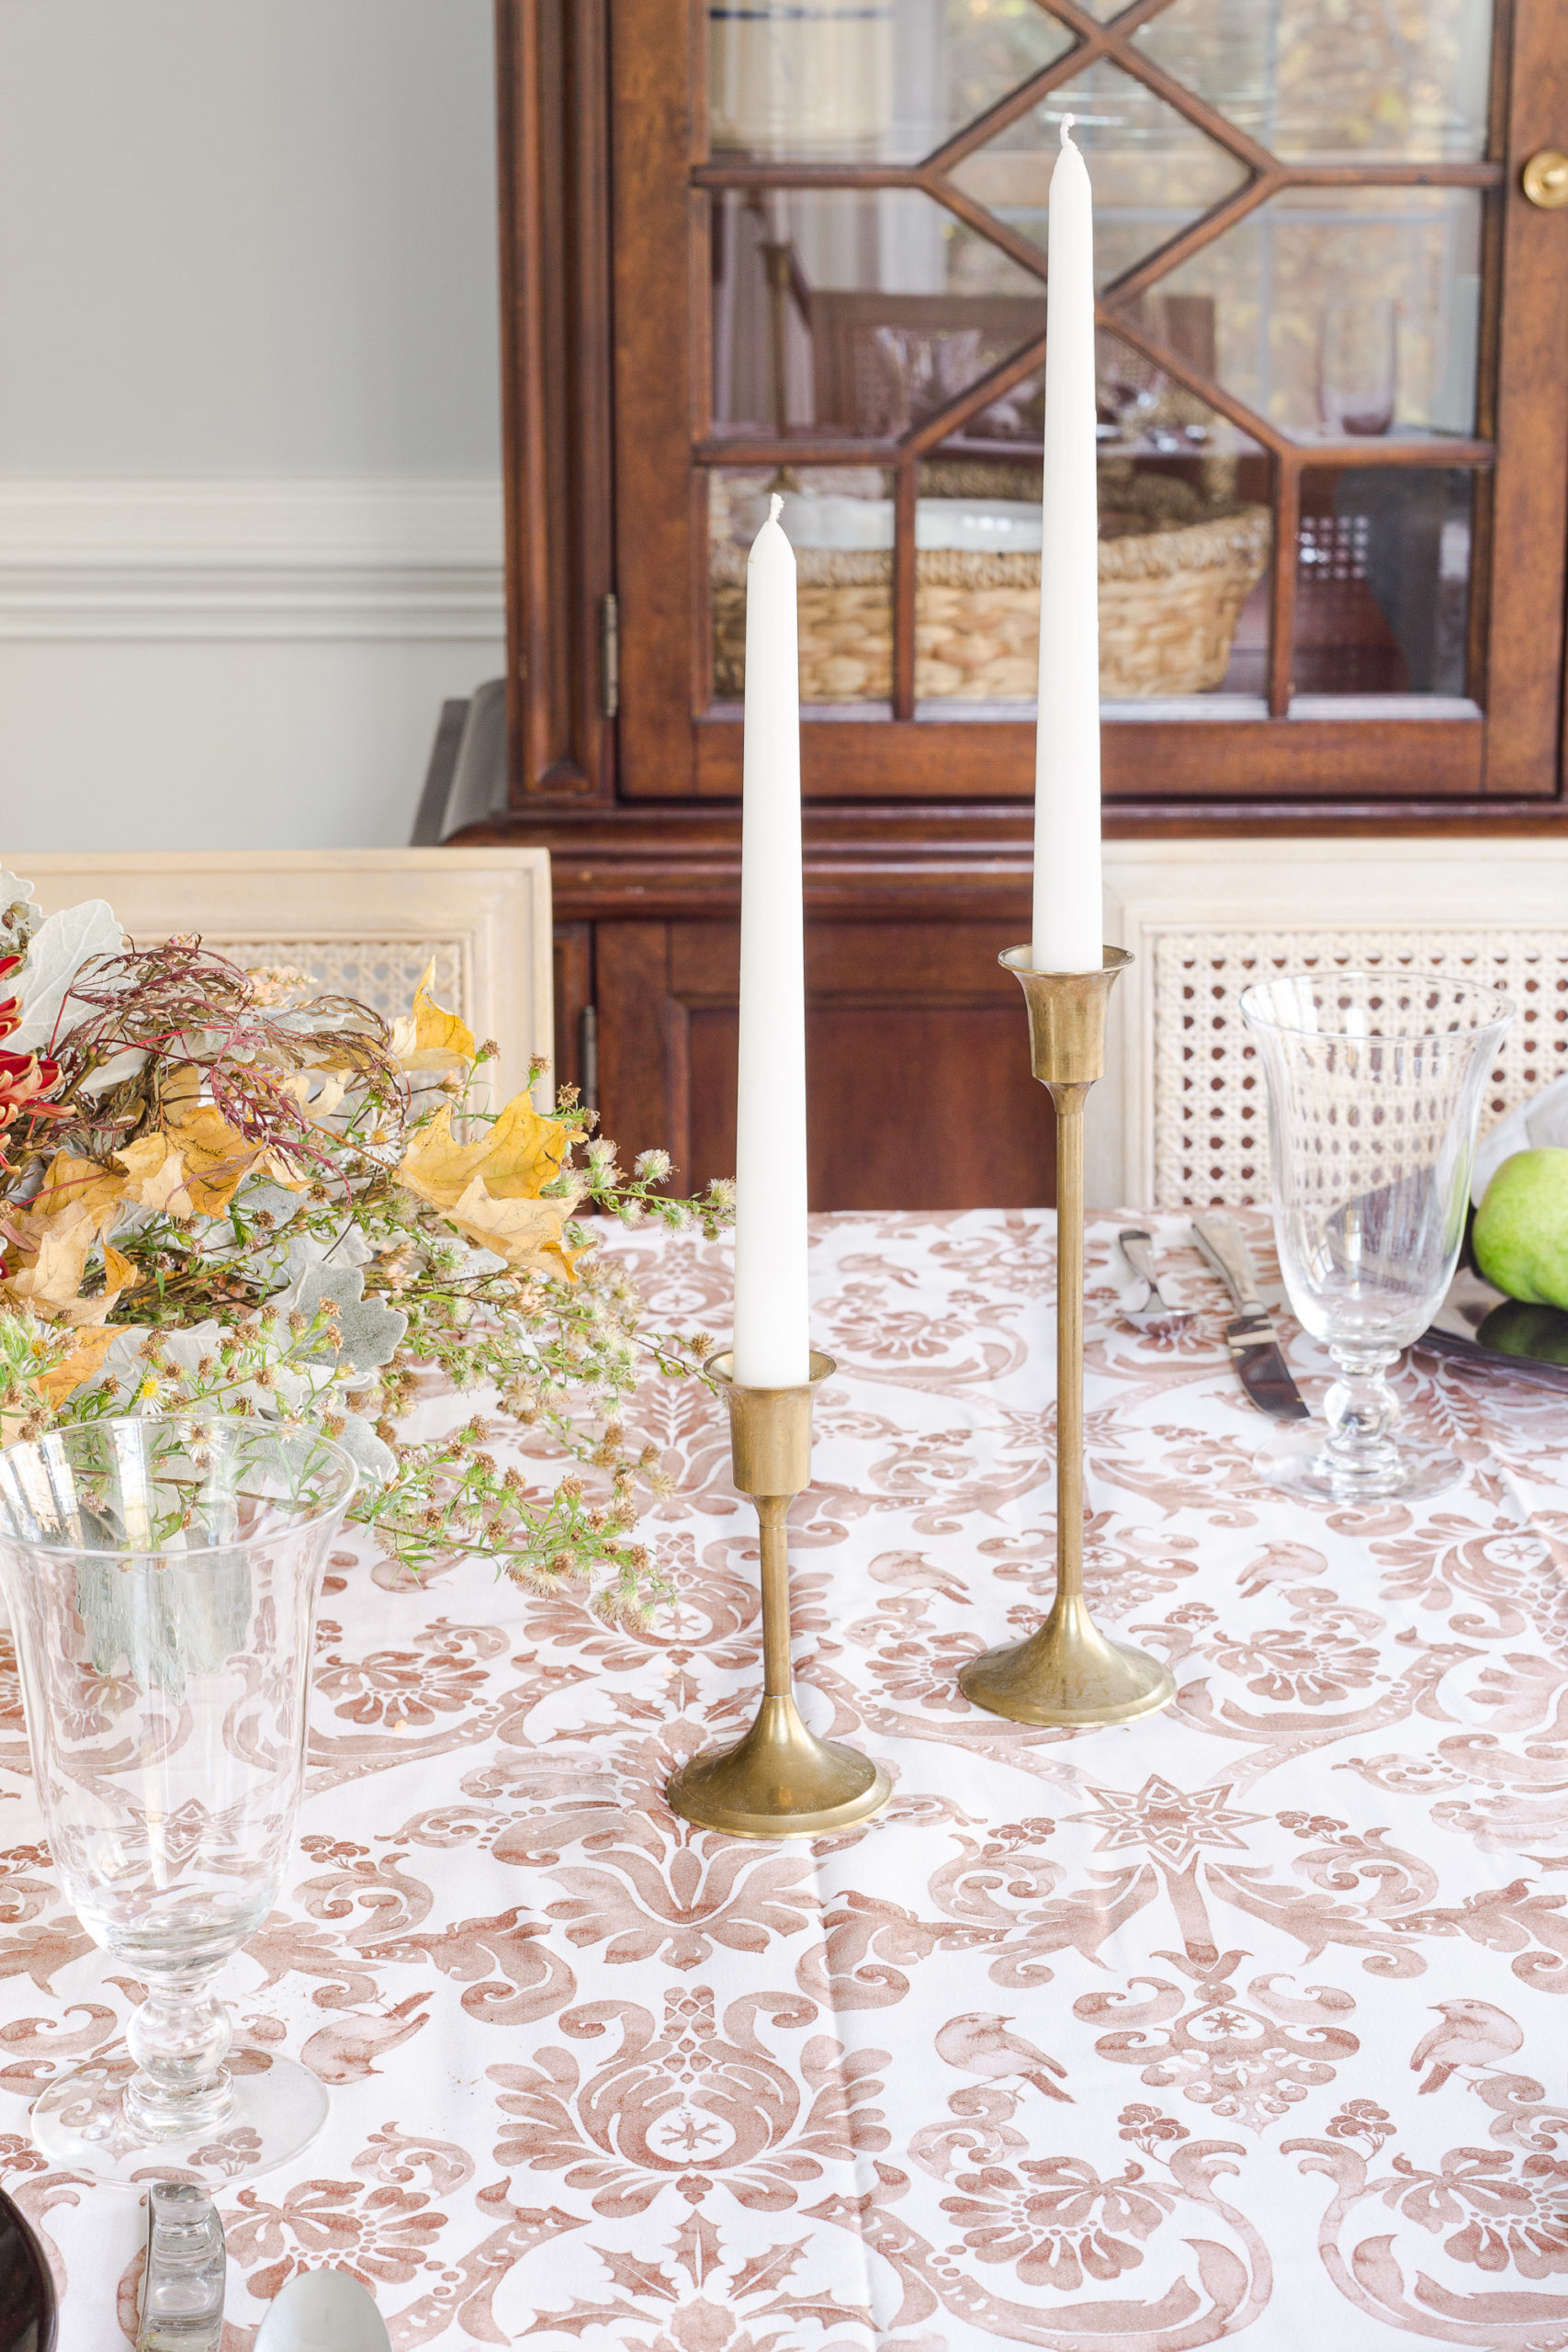 5 Tips for Styling Your Thanksgiving Table